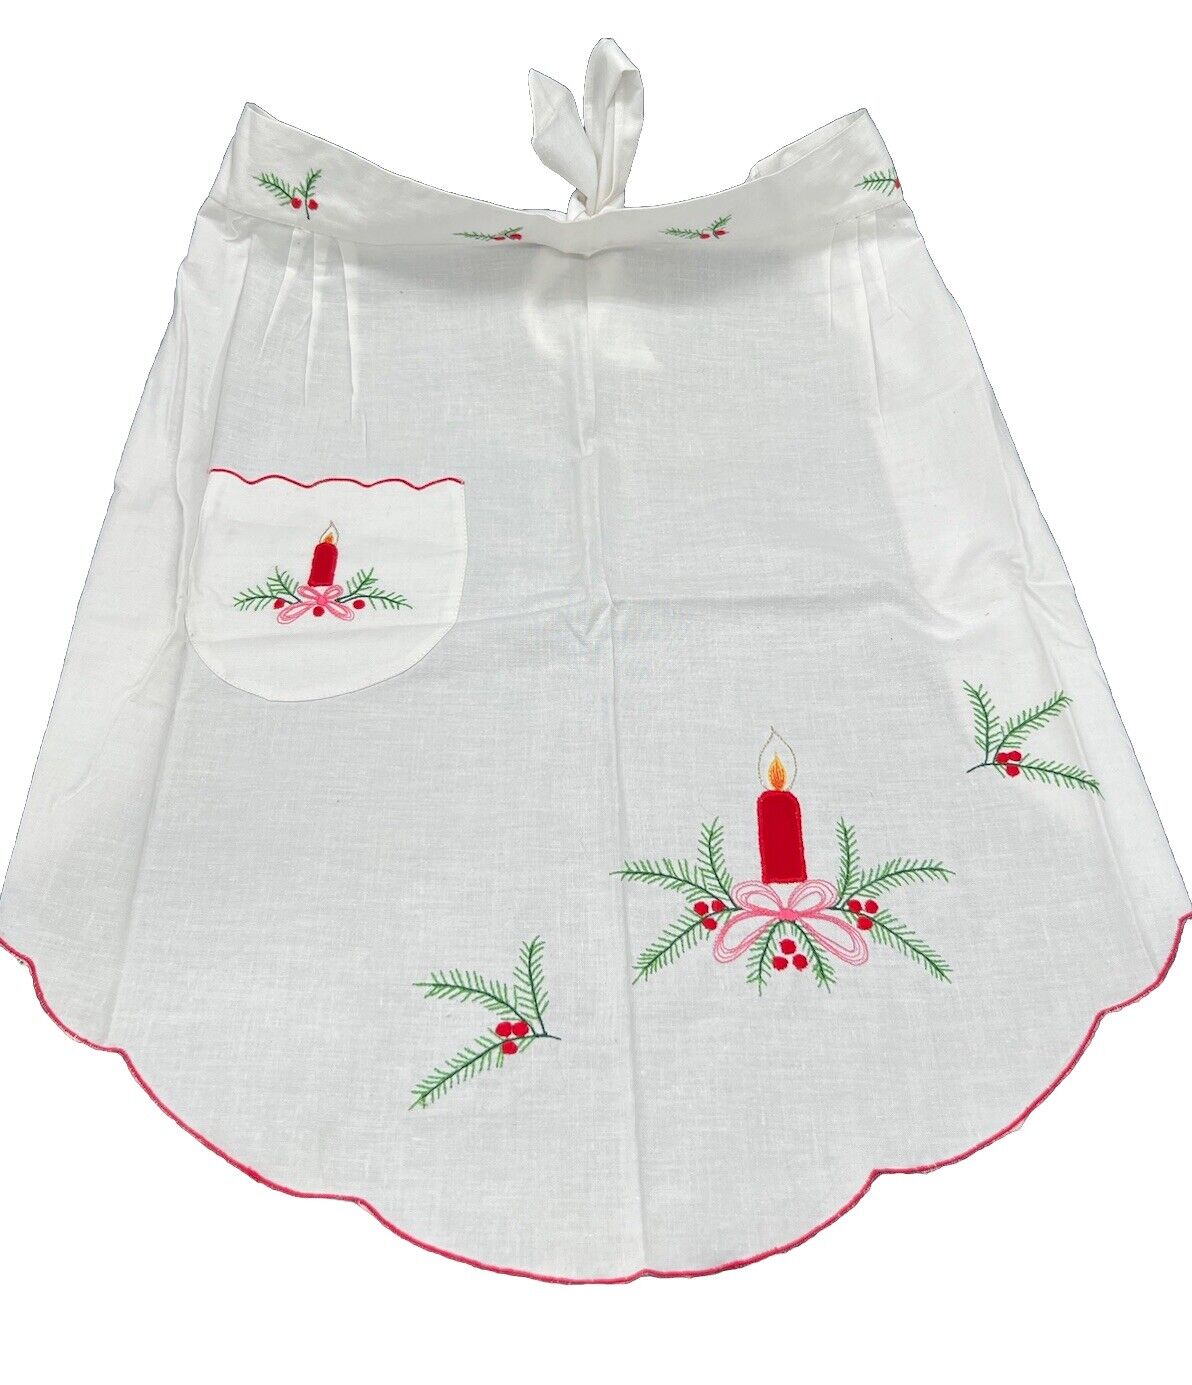 Vintage Embroidered Christmas Apron- Pocket Pleats Red Trim On White Candle